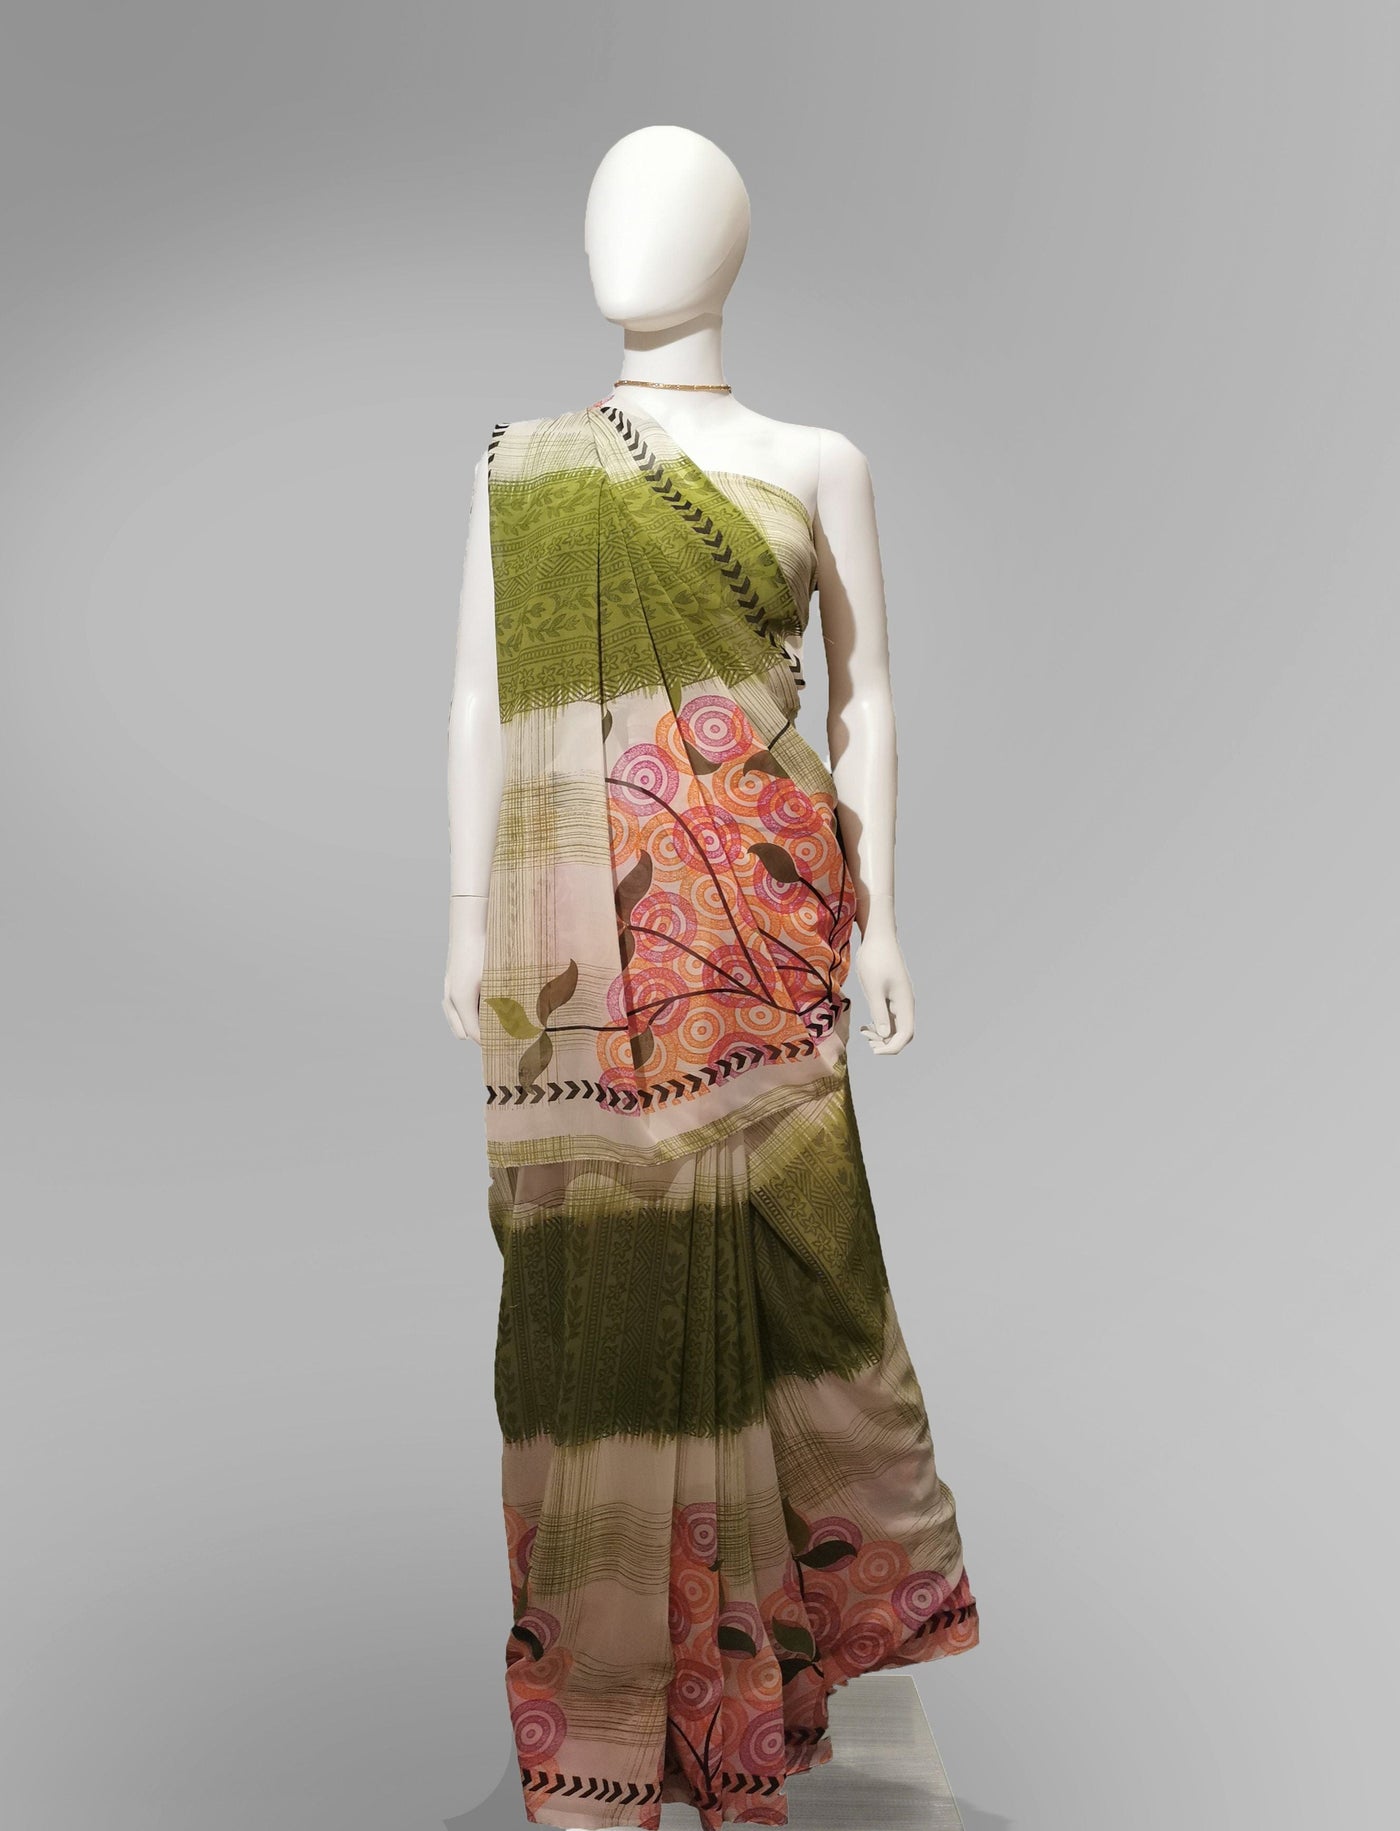 Saree in Green and Pink with Multi Patterned Print Indian Clothing in Denver, CO, Aurora, CO, Boulder, CO, Fort Collins, CO, Colorado Springs, CO, Parker, CO, Highlands Ranch, CO, Cherry Creek, CO, Centennial, CO, and Longmont, CO. NATIONWIDE SHIPPING USA- India Fashion X